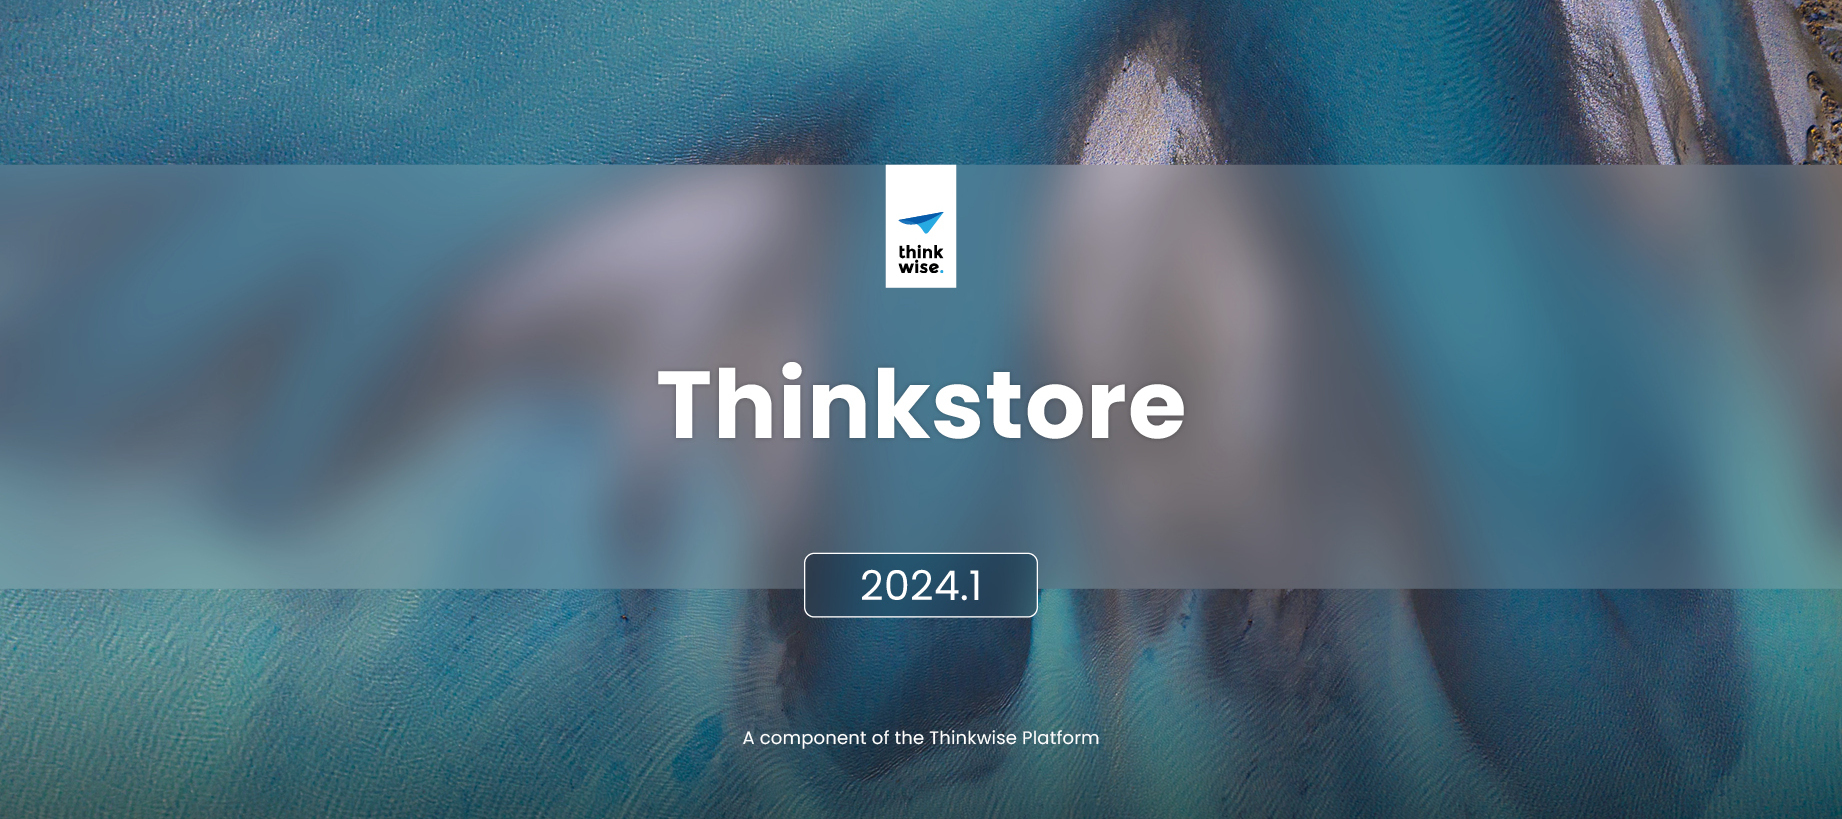 Release notes Thinkstore (2024.1)